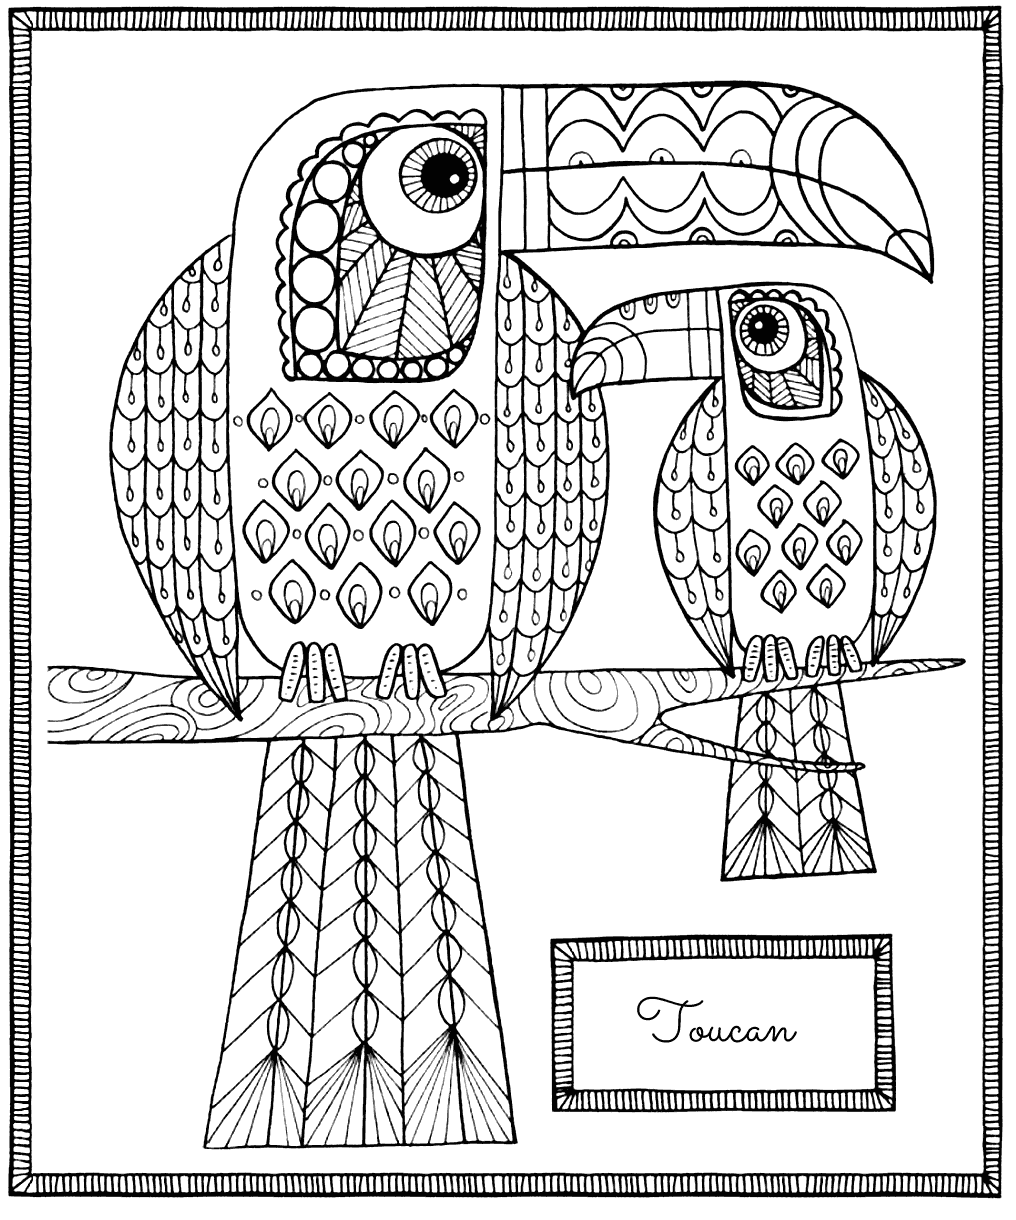 Toucan Aztec Style Art Coloring Page